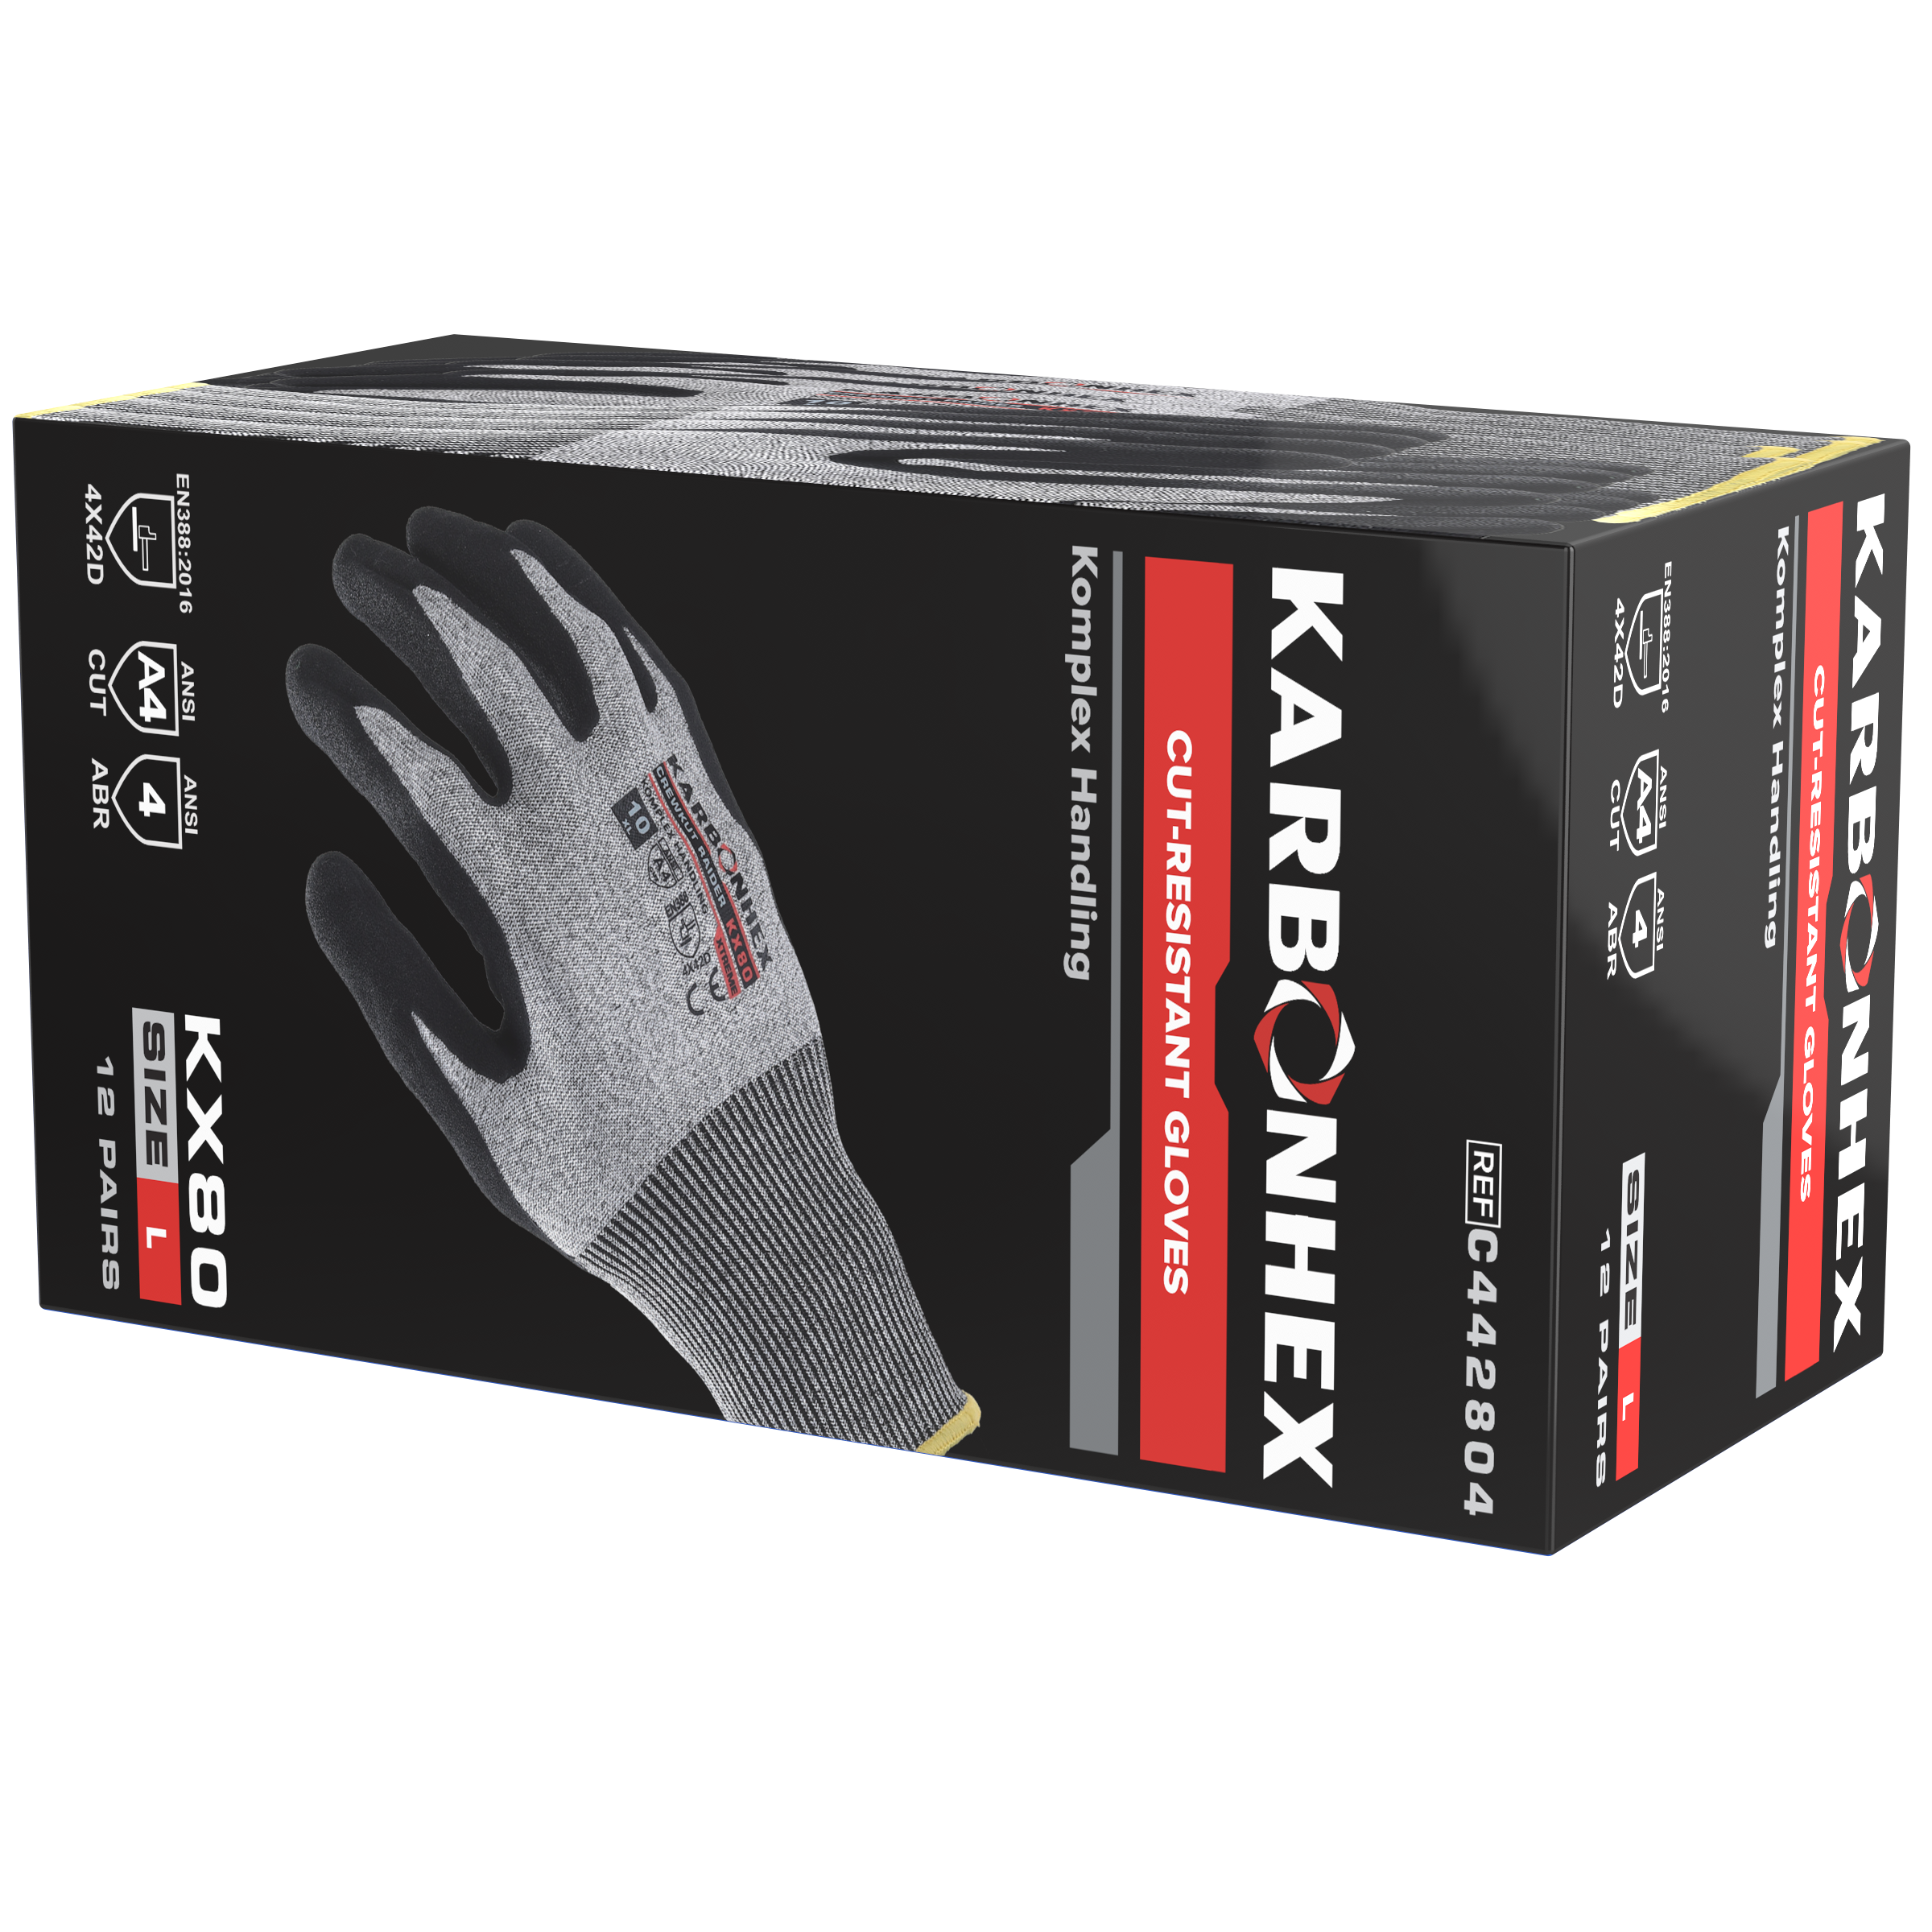 KarbonHex® KX80 by SW® Purpose Built Cut-Resistant Gloves with Oeko-Tex Safety Certification (12 Pairs Per Box)